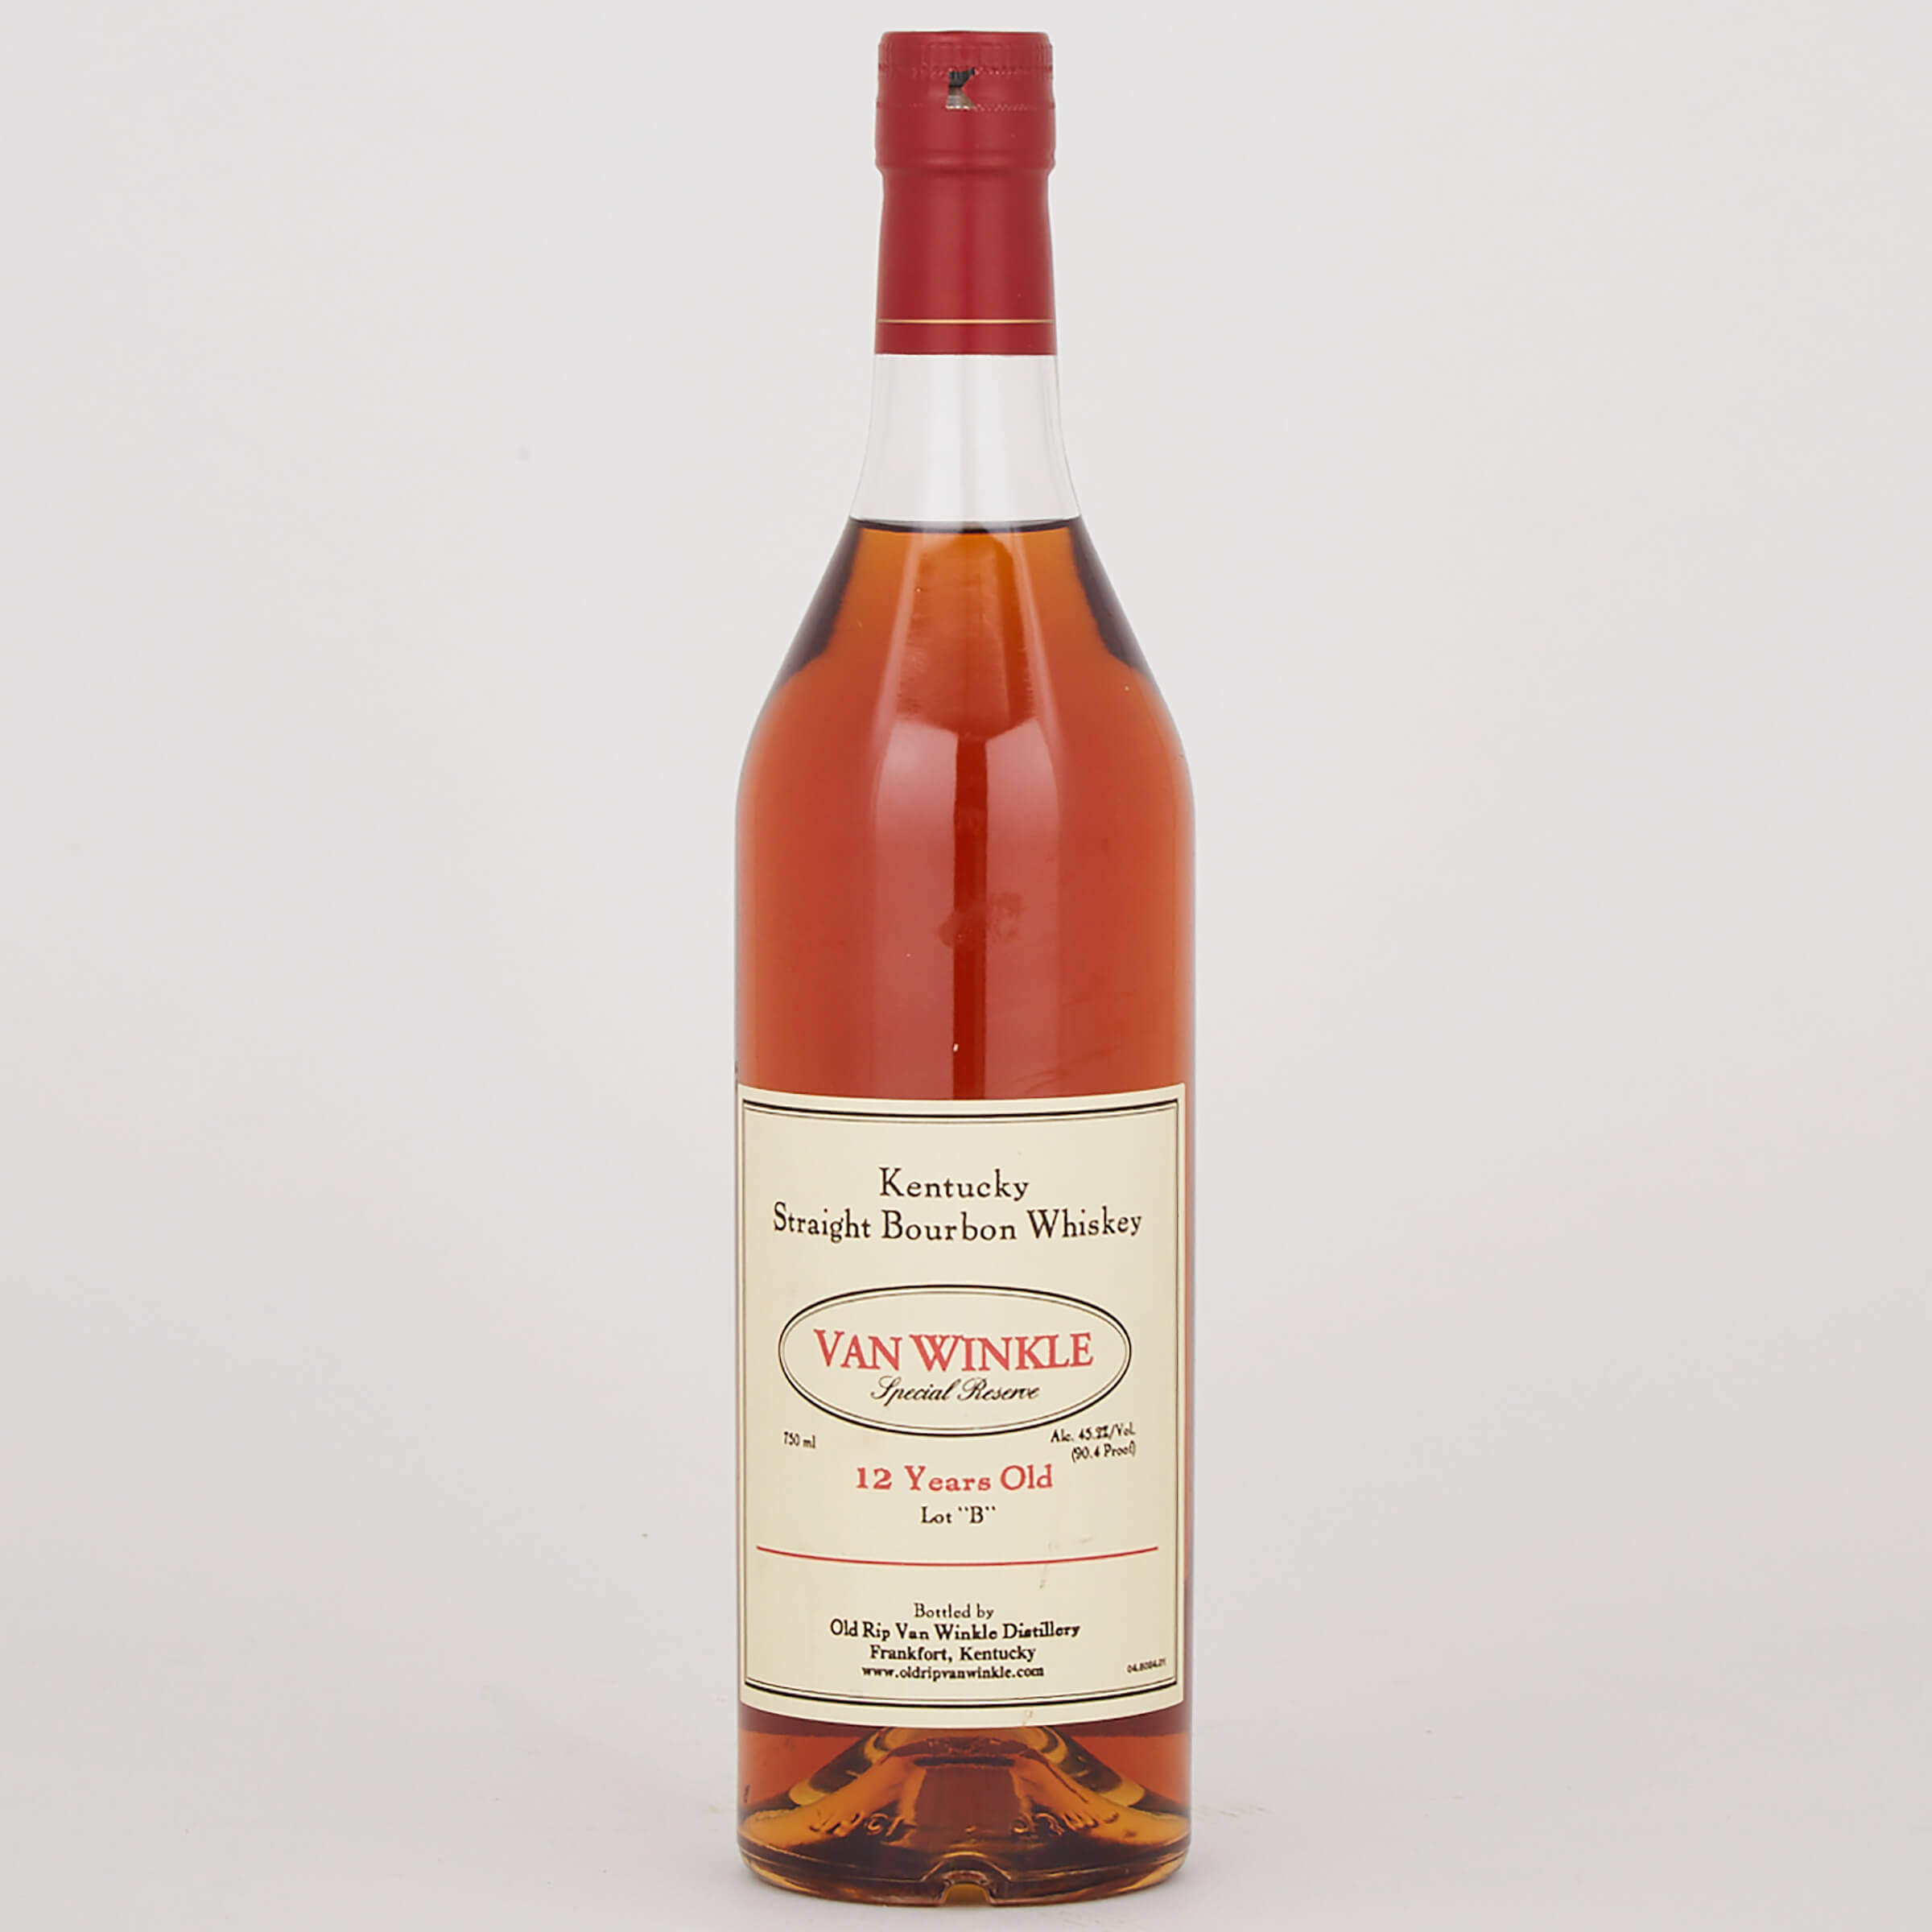 VAN WINKLE SPECIAL RESERVE KENTUCKY STRAIGHT BOURBON WHISKEY LOT “B” 12 YEARS (ONE 750 ML)